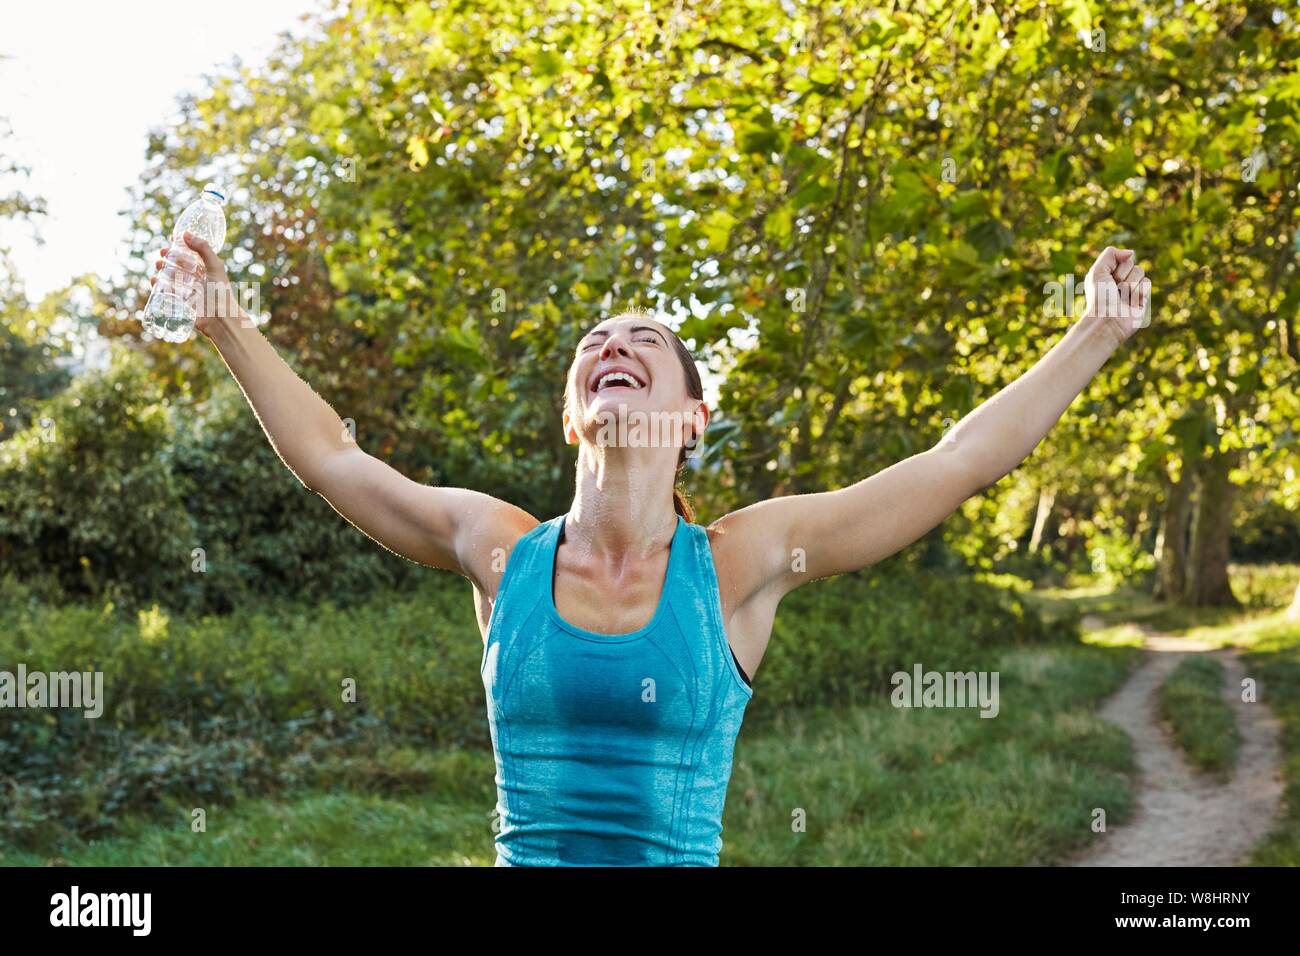 Young woman cheering with her arms out. Stock Photo